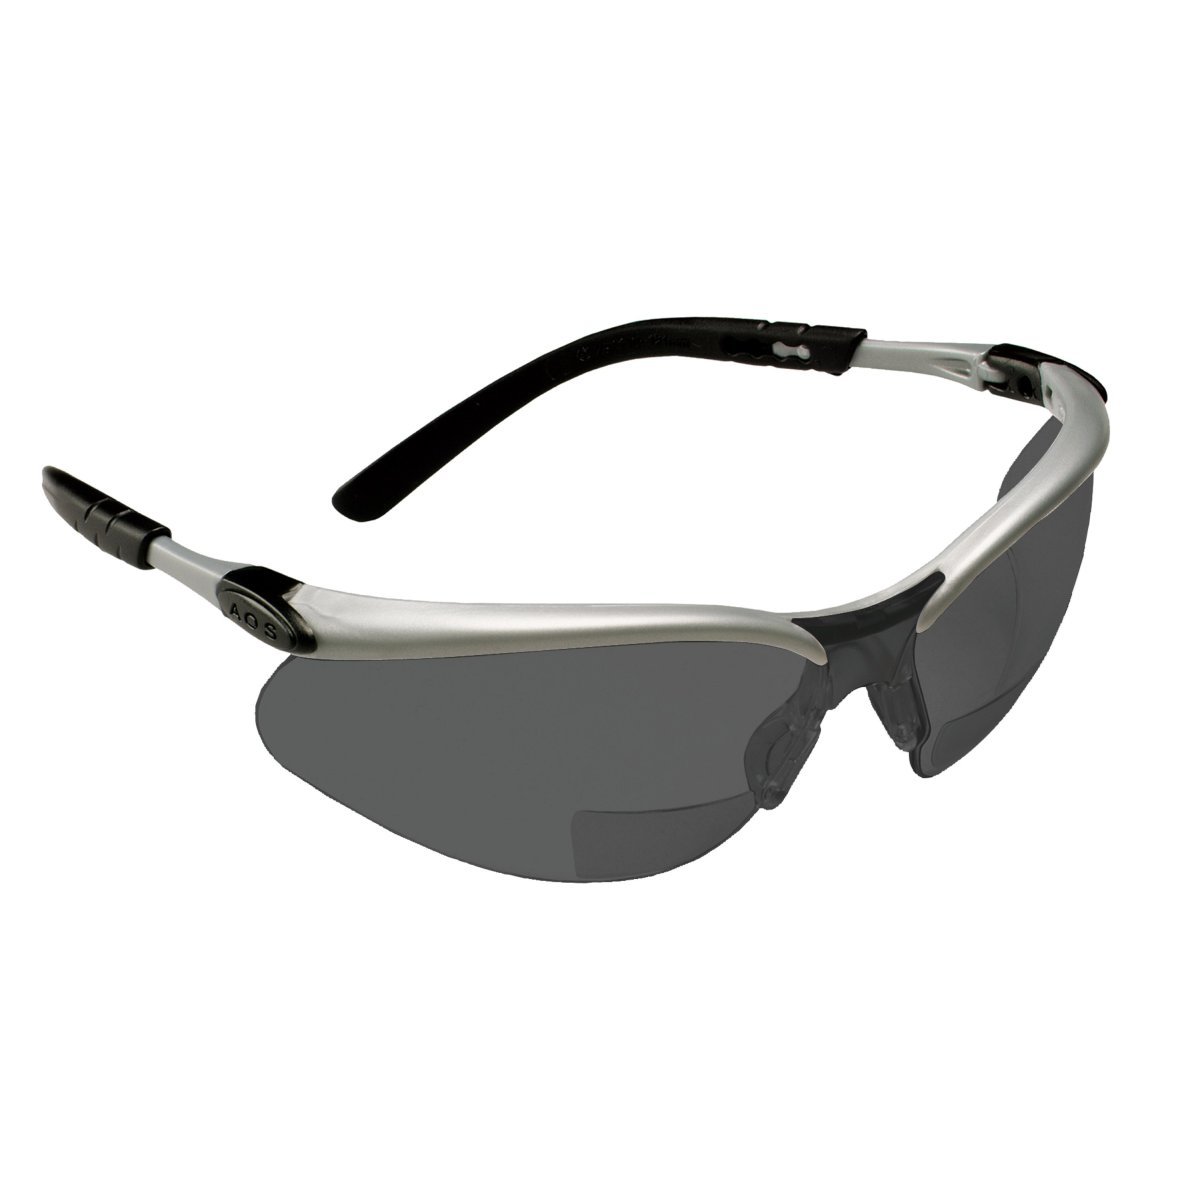 3M™ BX™ Reader Protective Eyewear 11377-00000-20 Gray Lens, Silver Frame, +1.5 Diopter (Availability restrictions apply.)